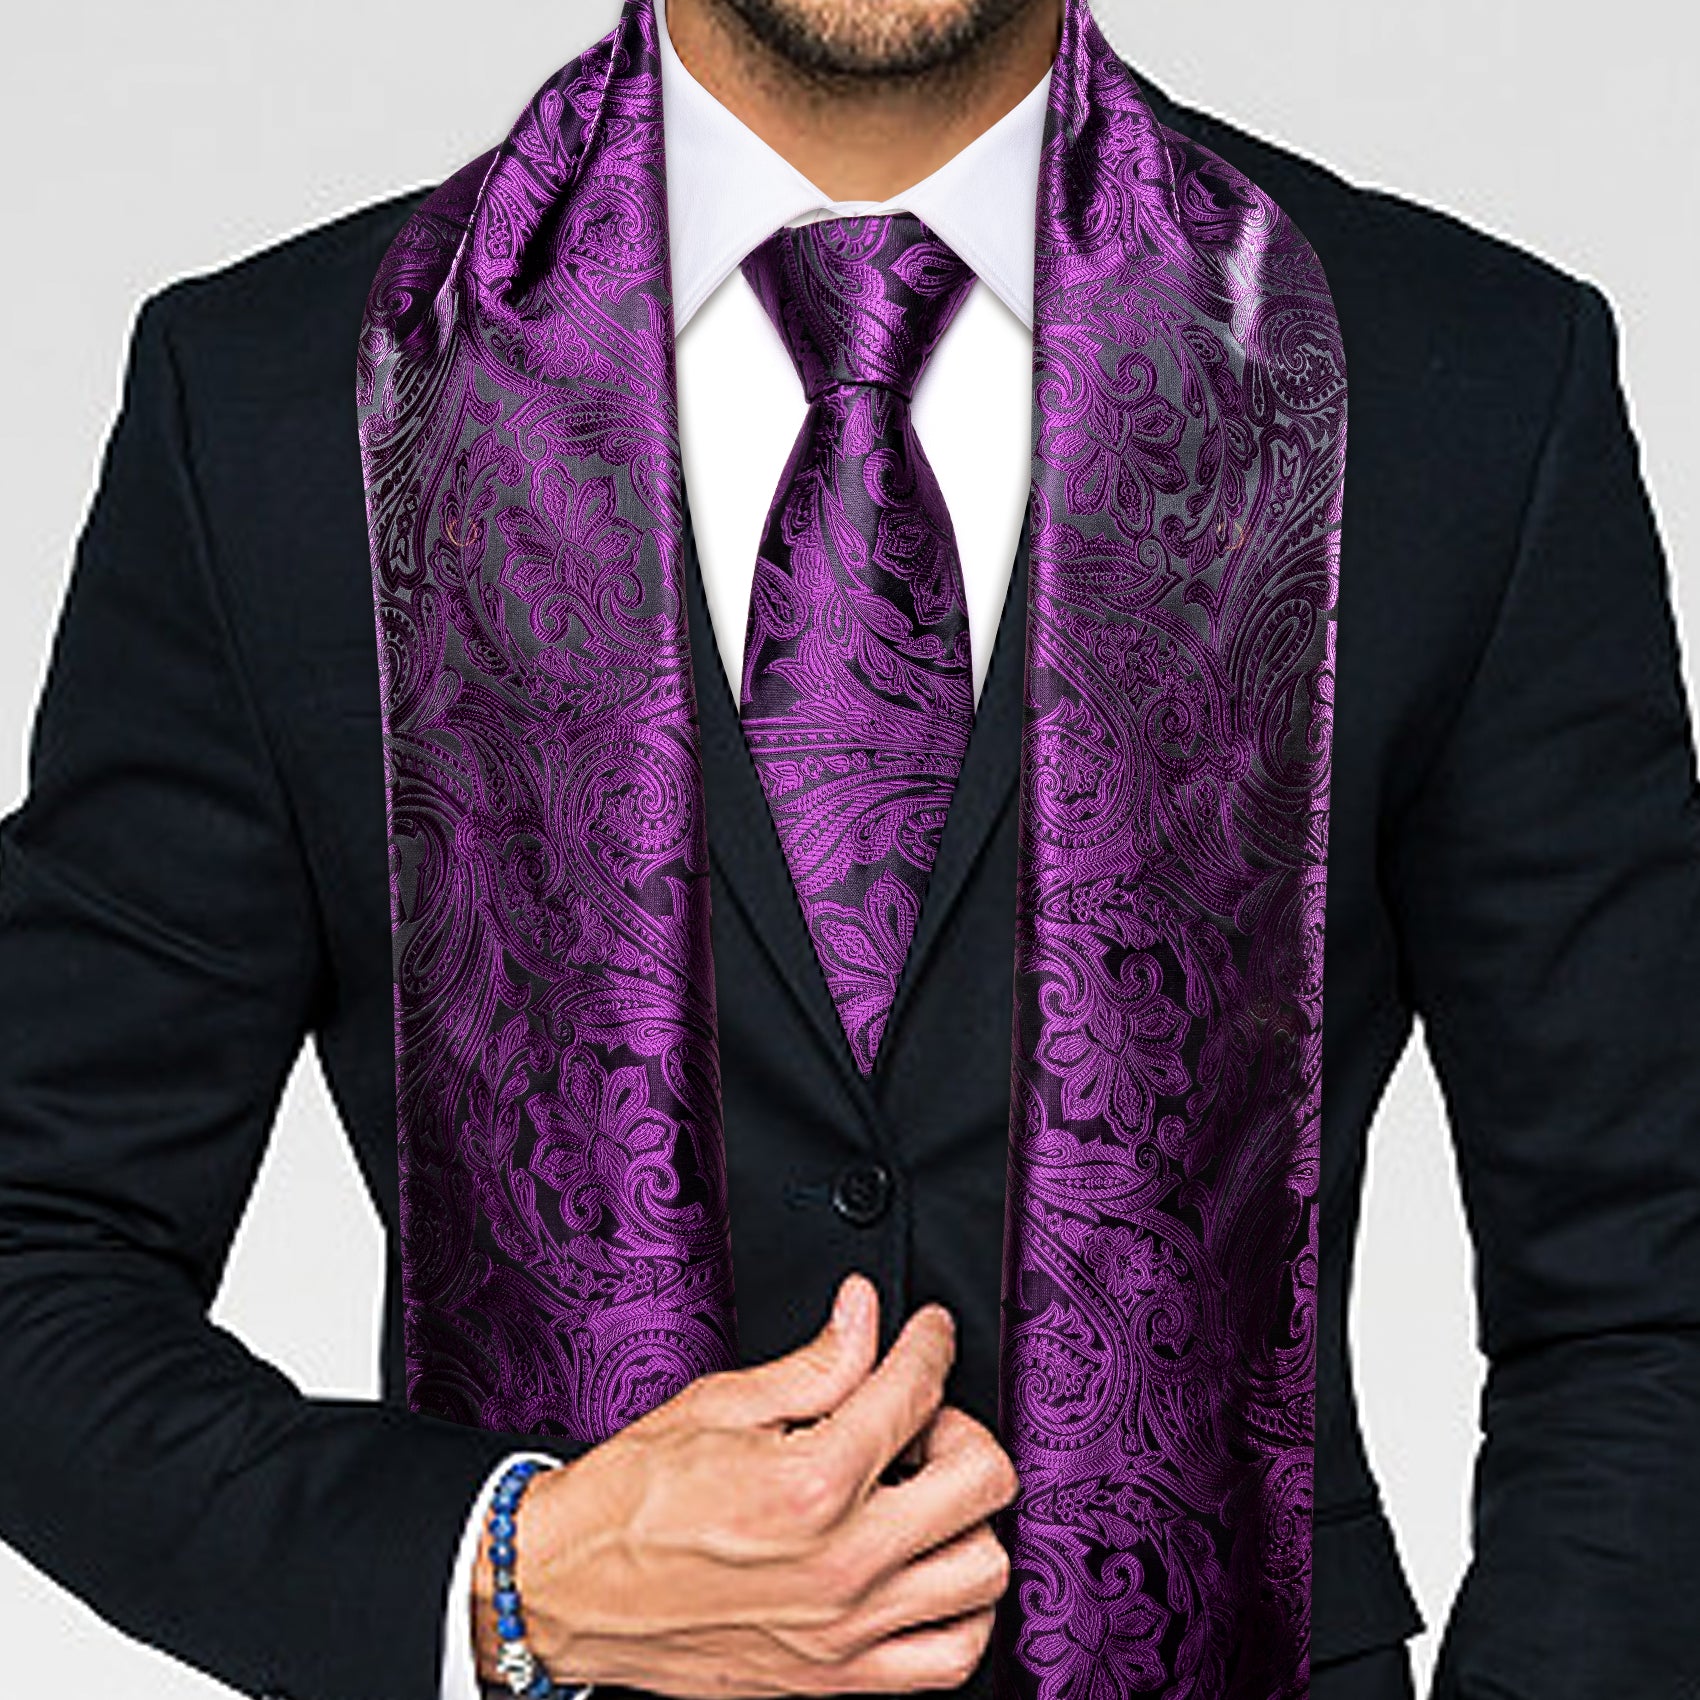 Barry.wang Men's Tie Black Purple Floral Scarf with Tie Set Fashion